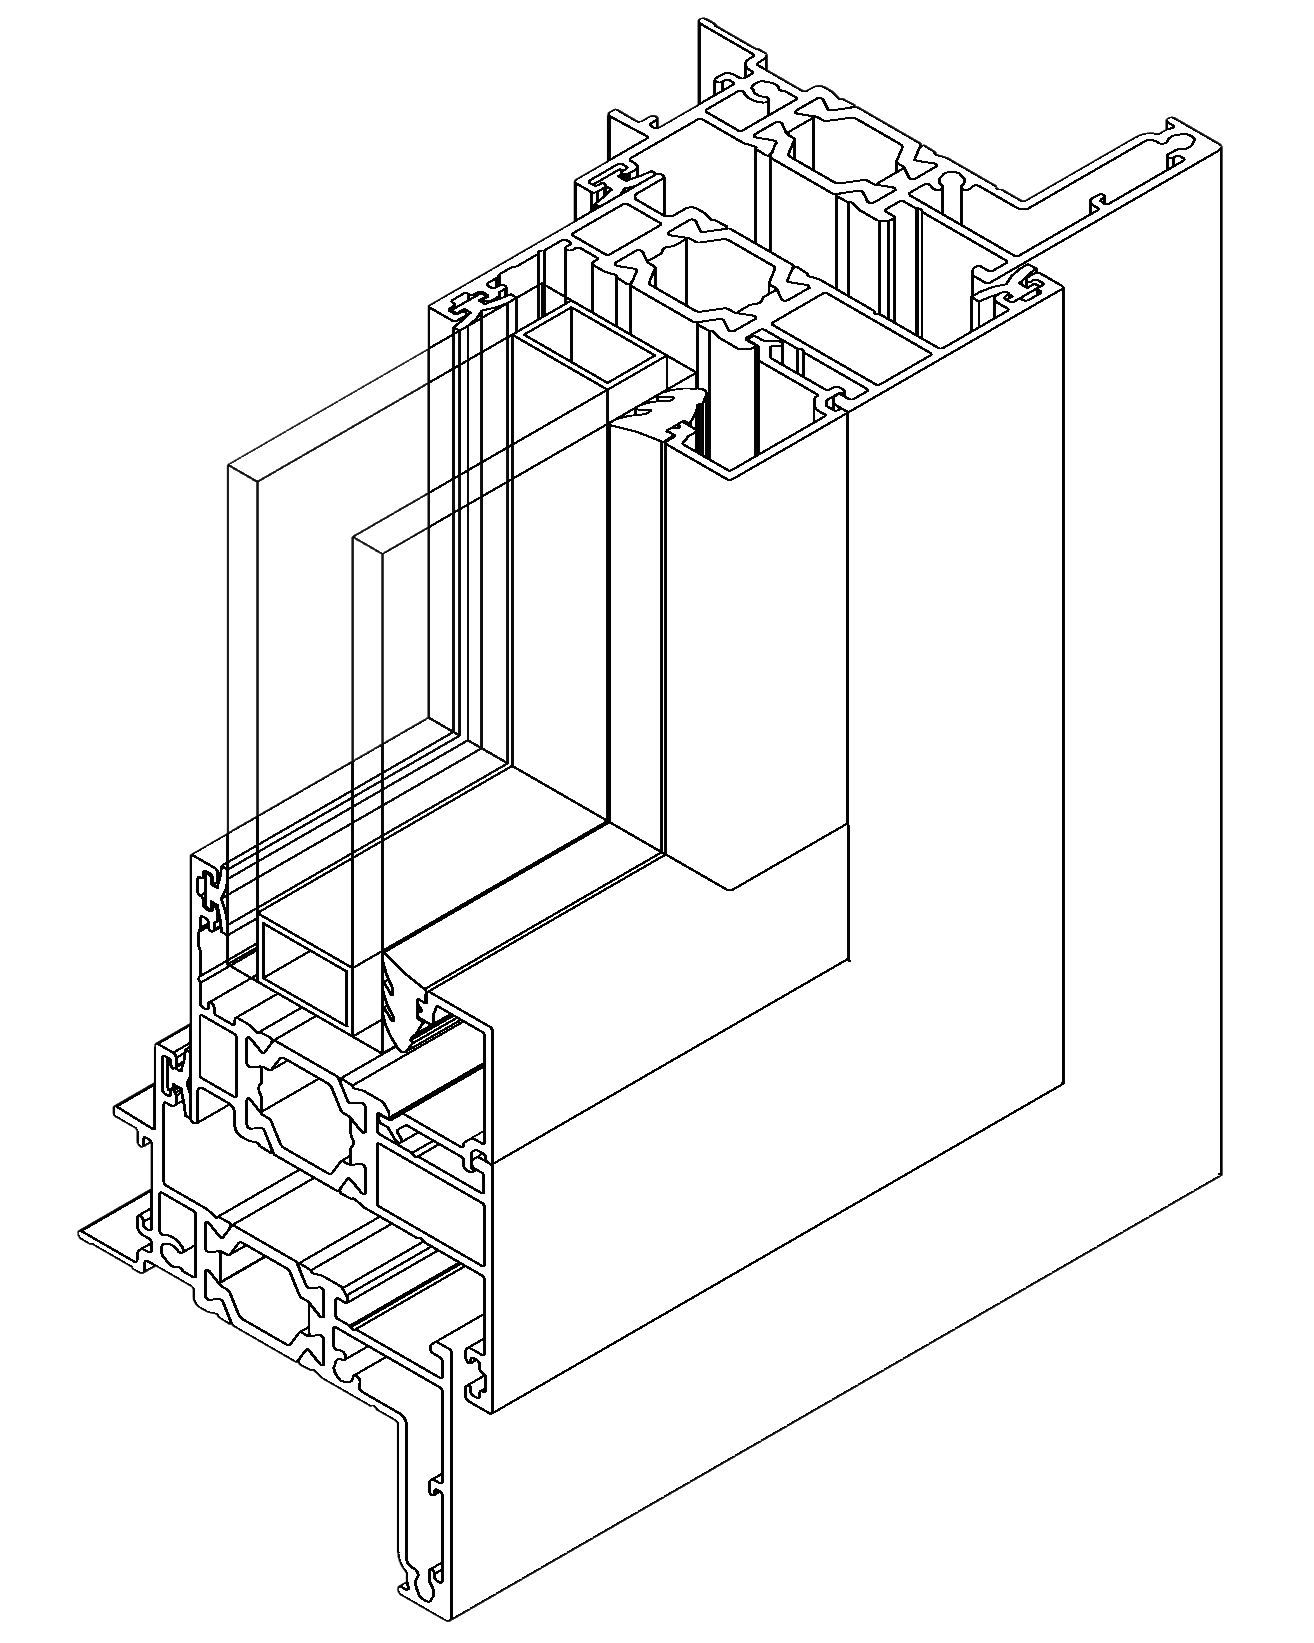 TH50 Awning Window - Isometric View (1)